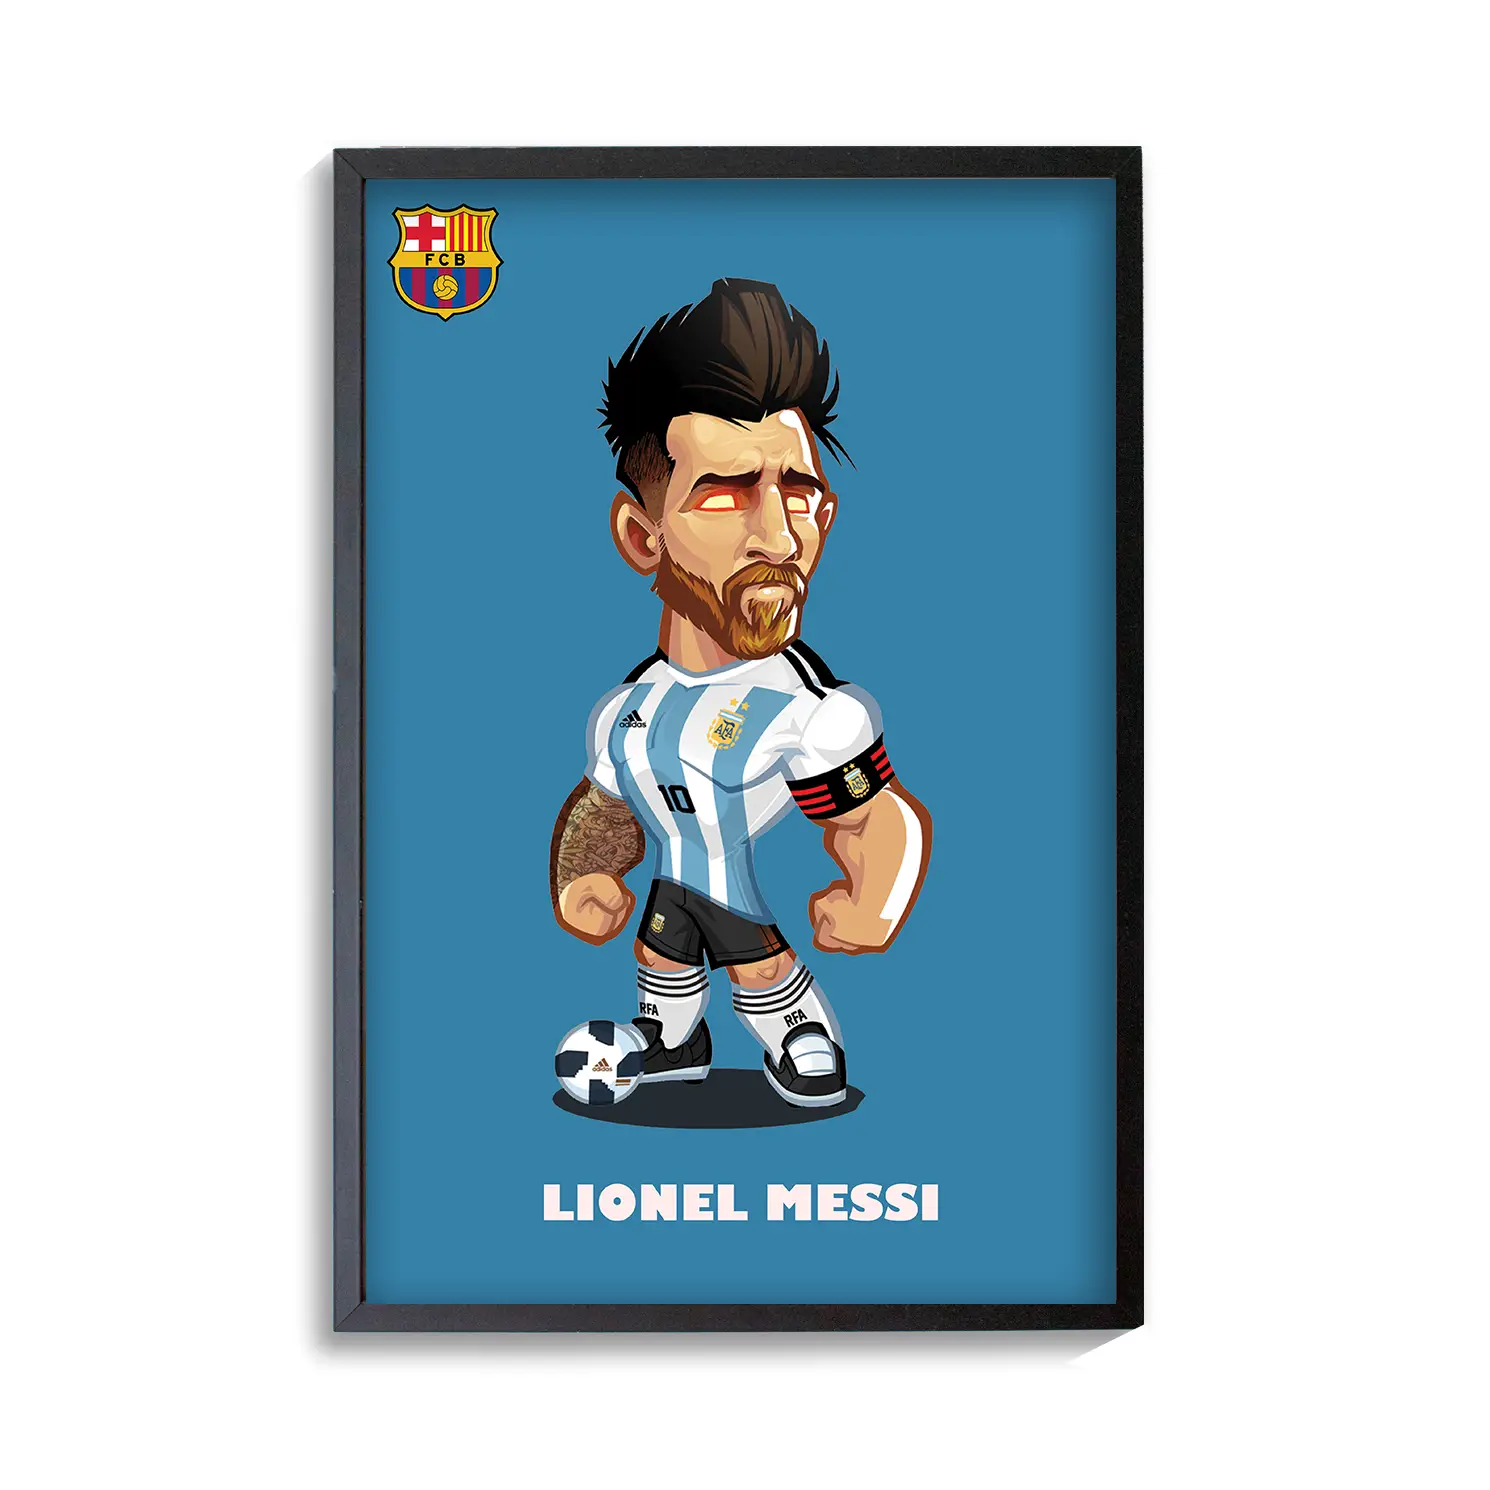 Lionel Messi Cartoon Poster for Home Office and Student Room Wall | Poster | Frame | Canvas